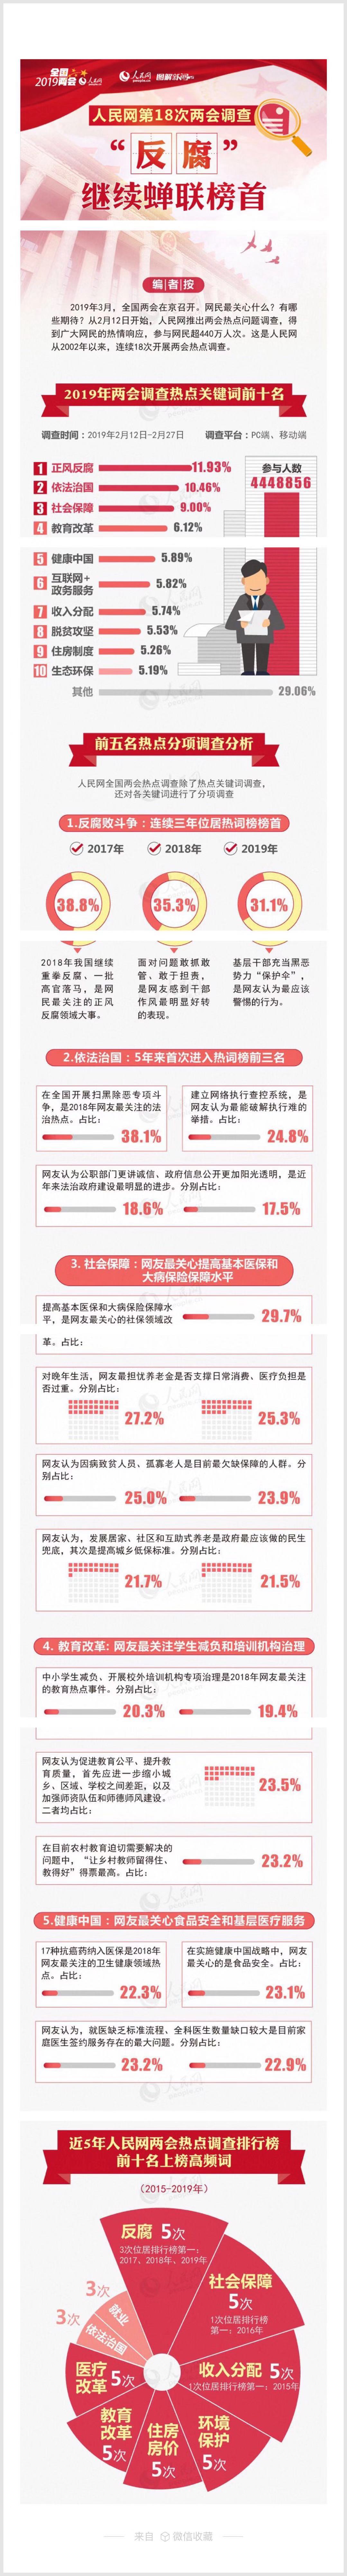 It's about the research conducted by People.cn listing and analysing what people care most about The National People's Congress (NPC) of the People's Republic of China and Chinese People's Political Consultative Conference